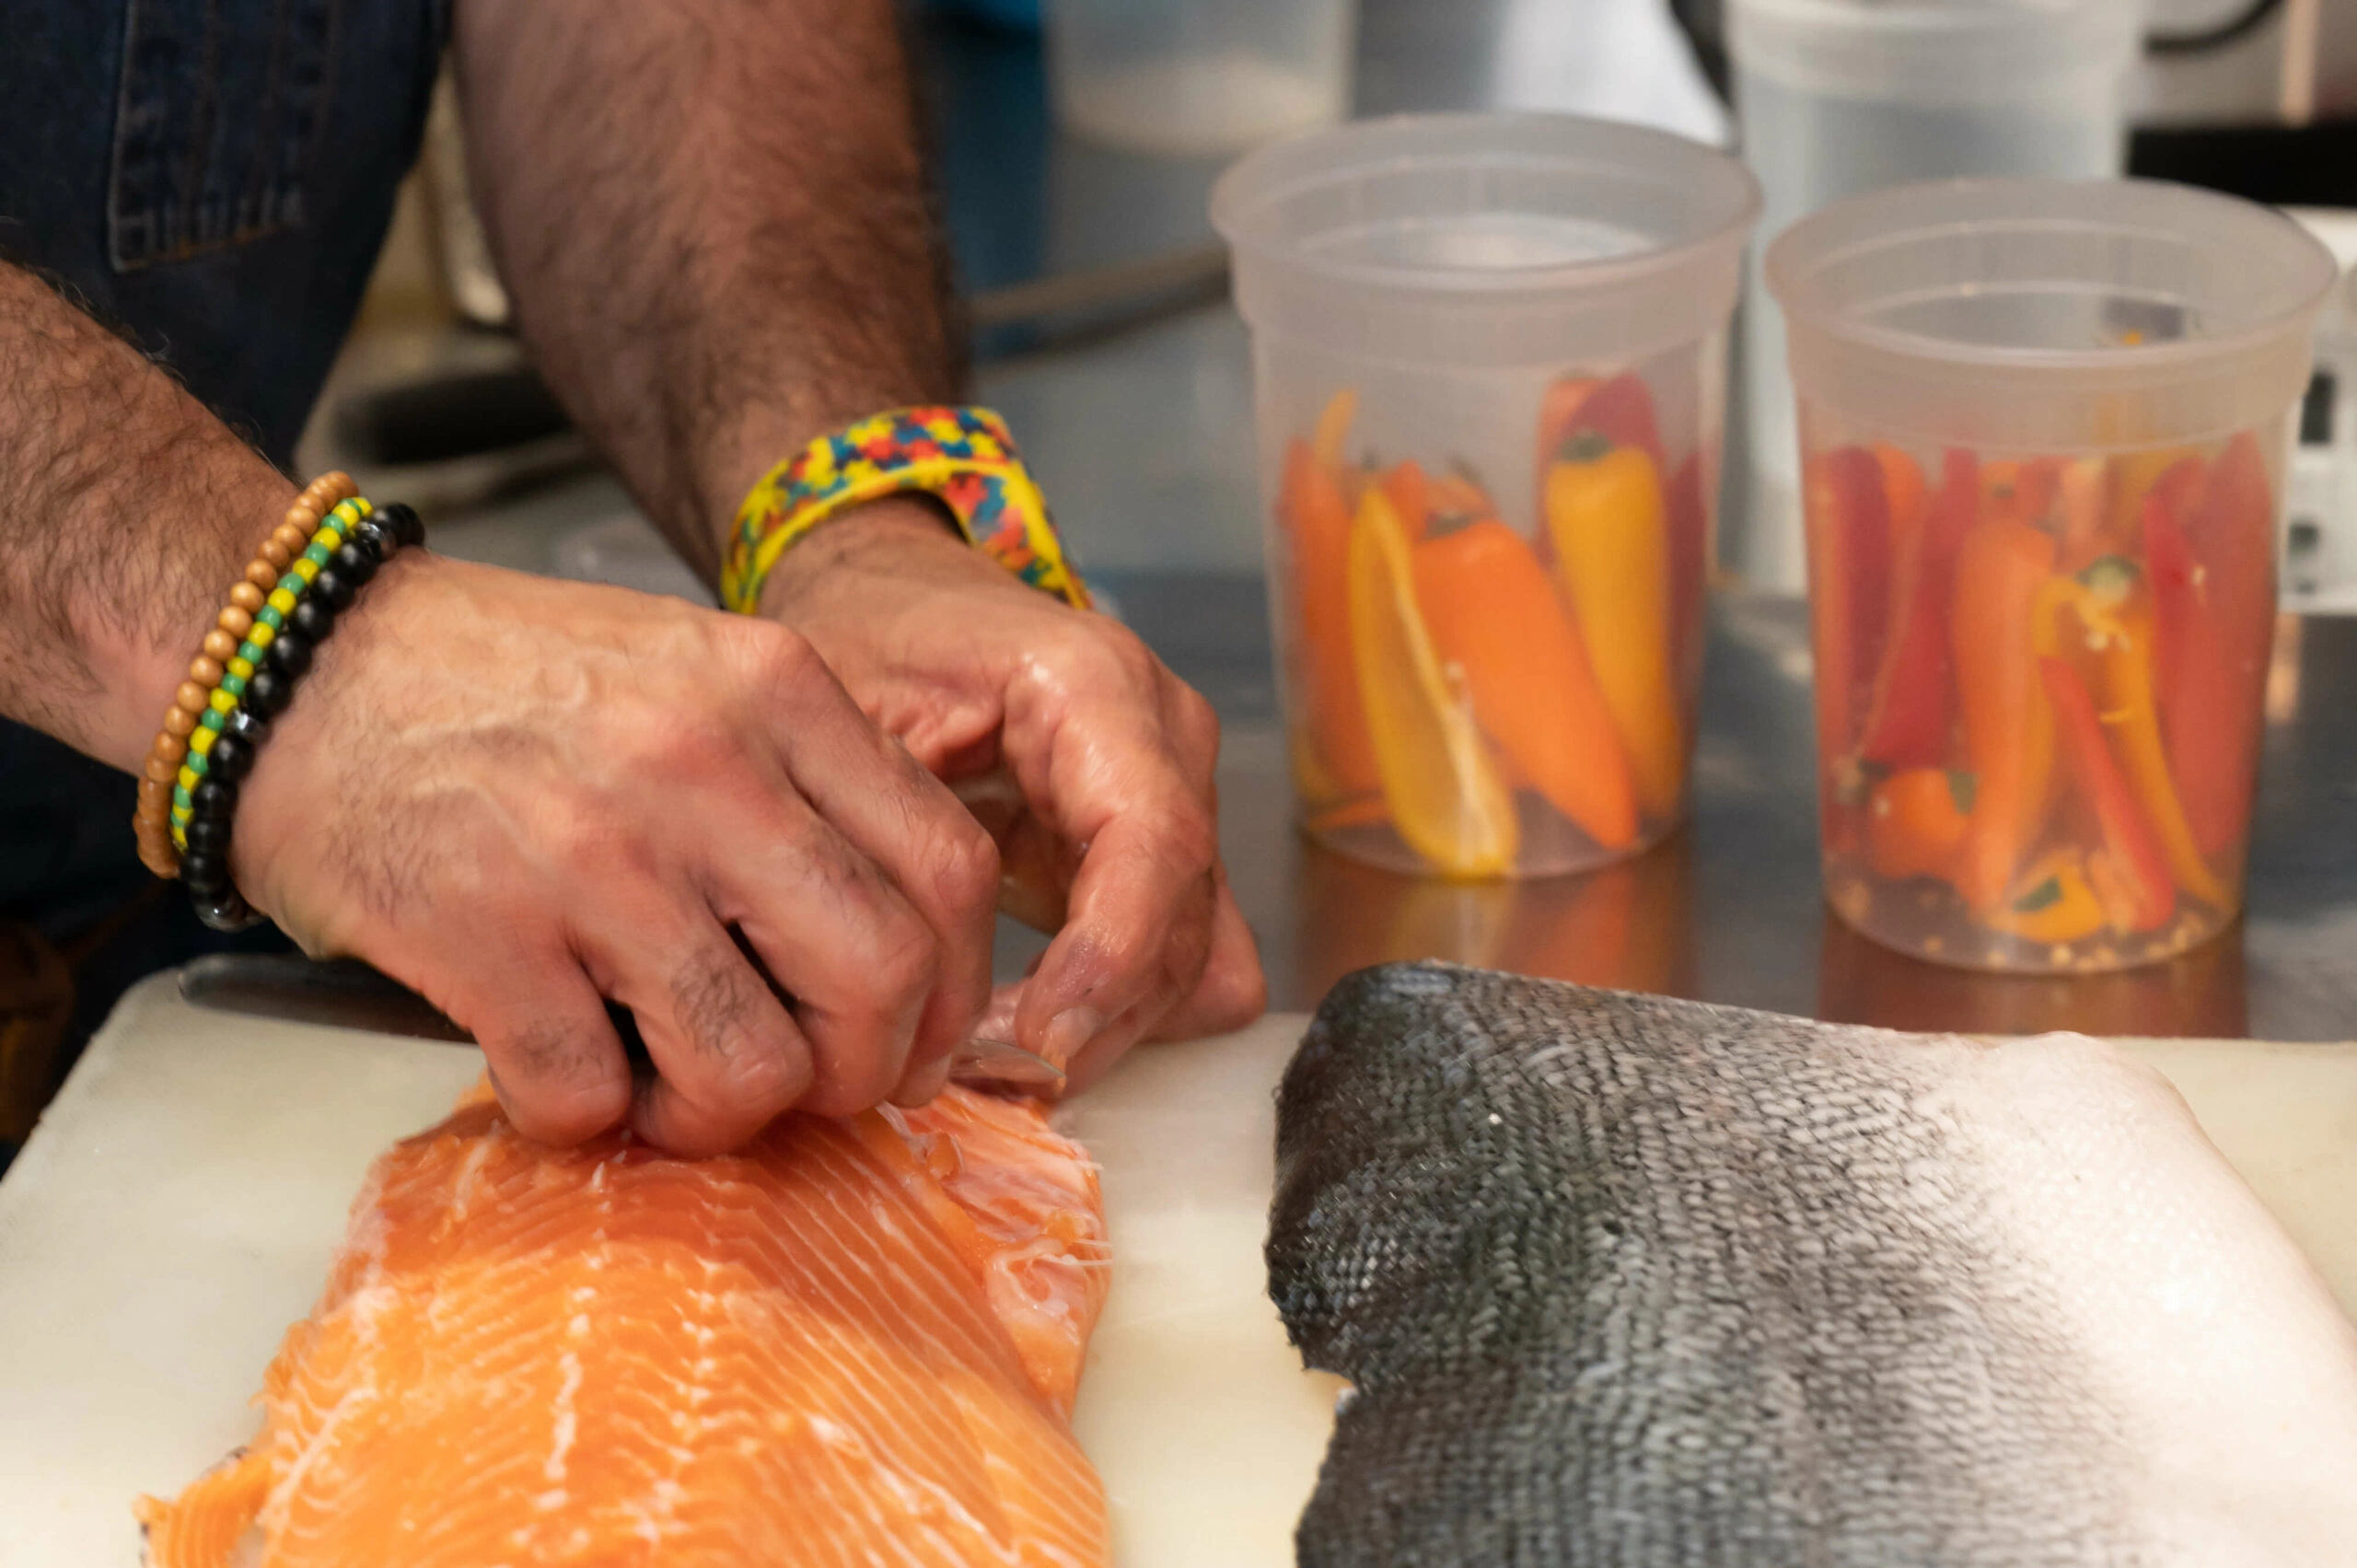 A chef meticulously preparing a salmon by skillfully removing its skin and deboning the fish